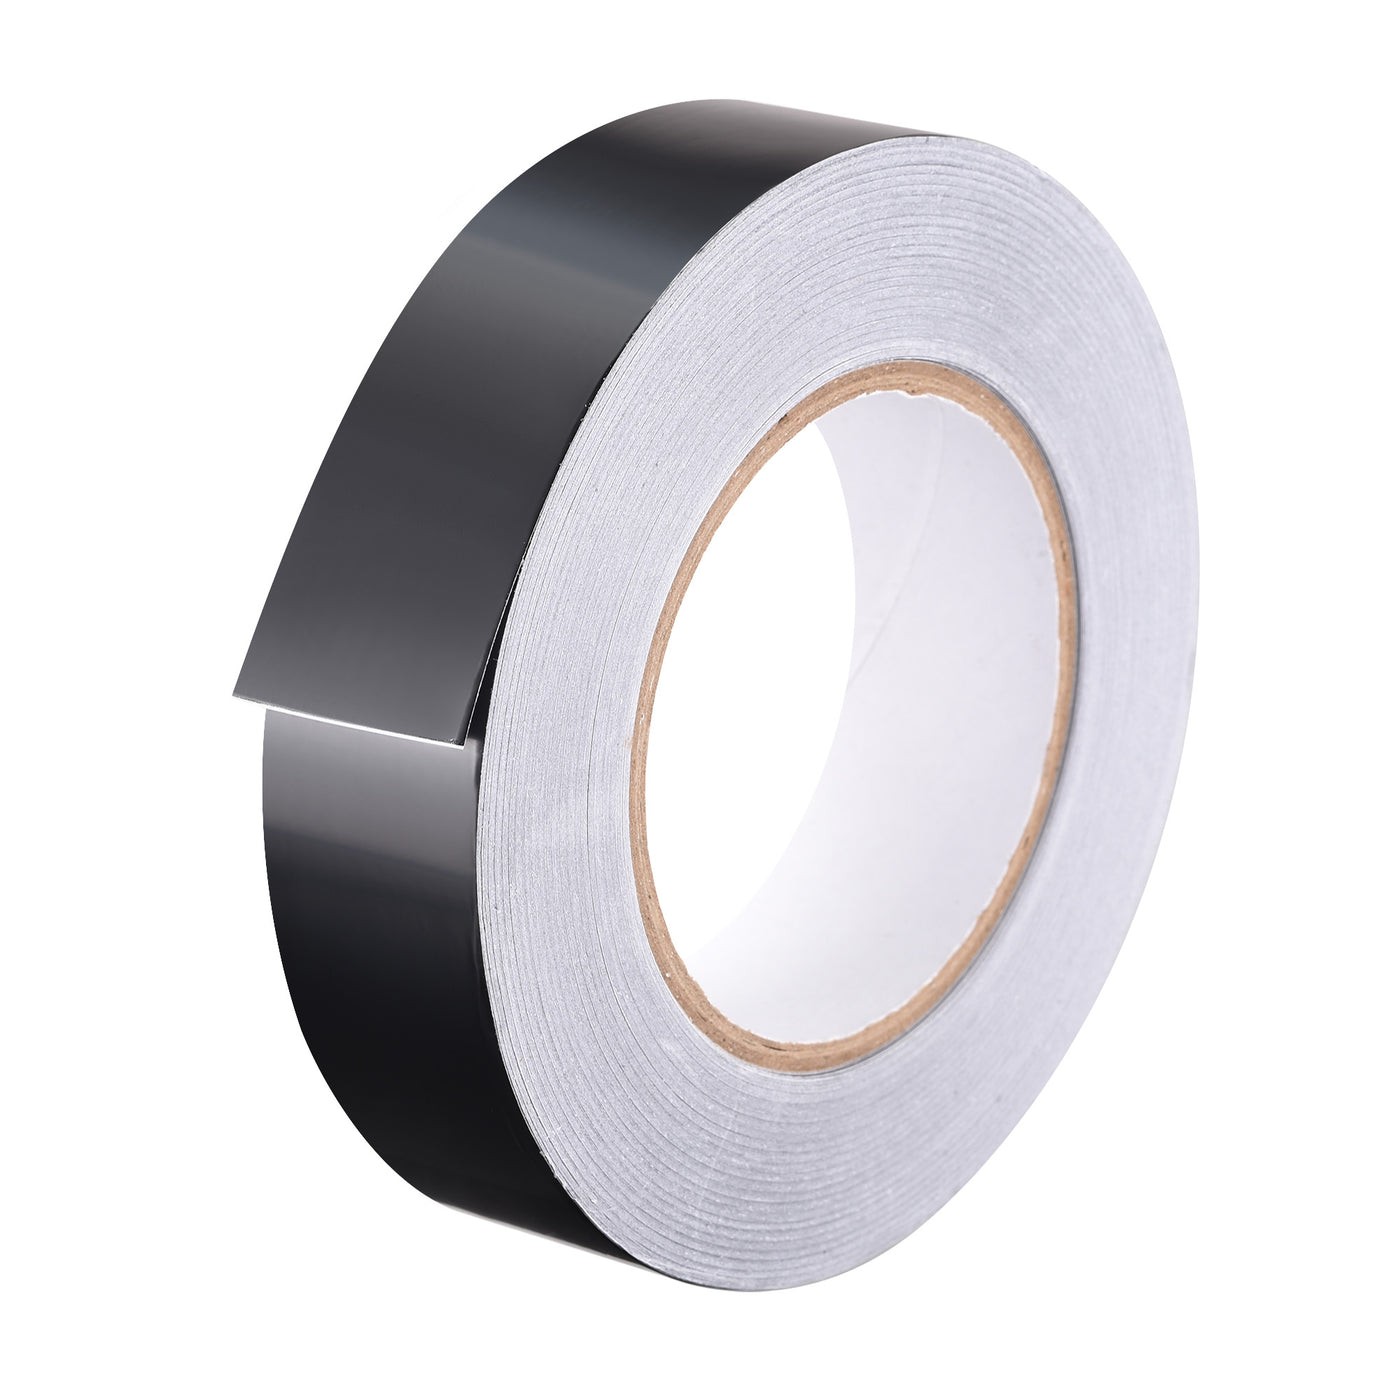 uxcell Uxcell 30mm Aluminum Foil Tape for HVAC, Patching Hot and Blocking light 50m/164ft